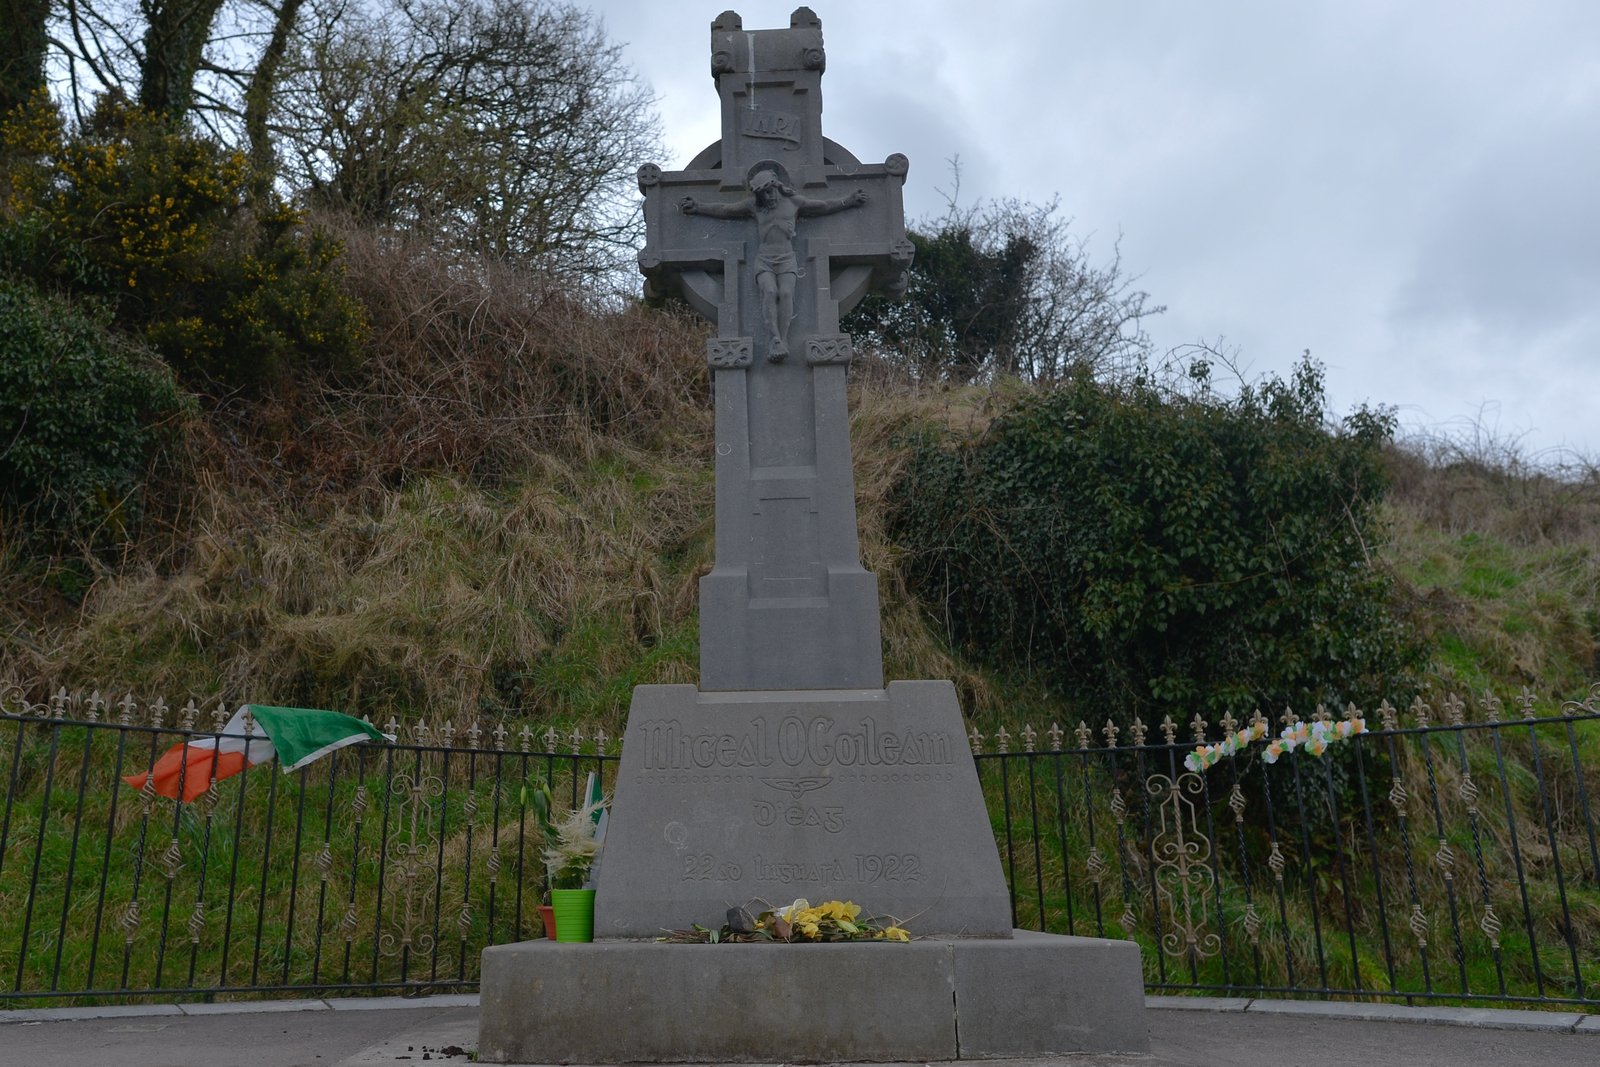 Image - The Béal na Bláth memorial cross (Pic: Getty Images)